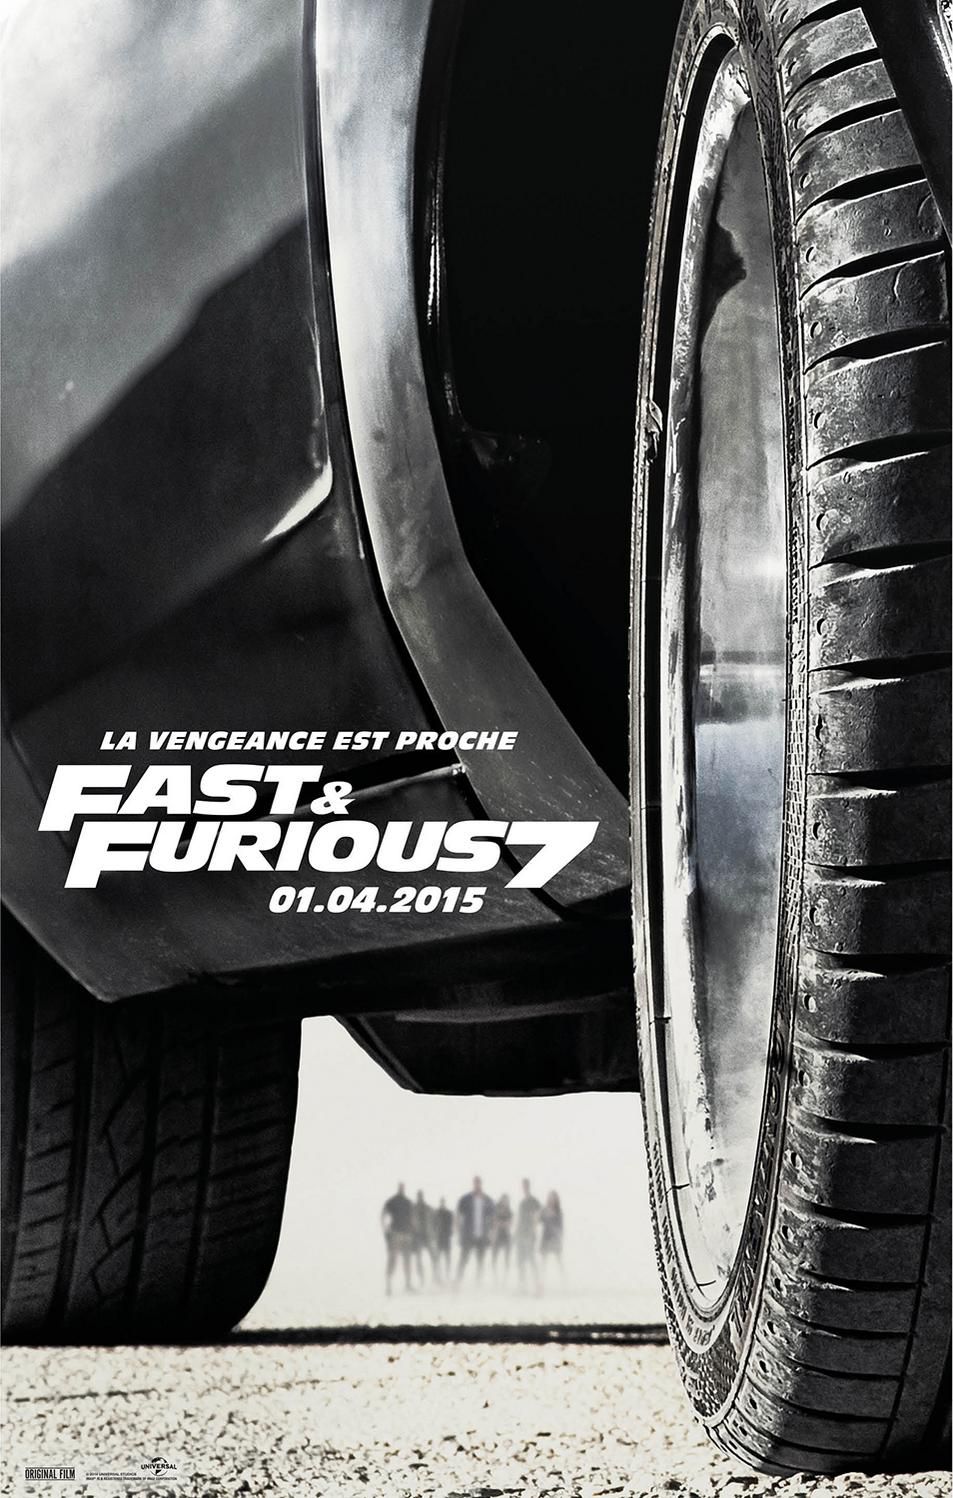 Fast & Furious 7 - Film (2015) streaming VF gratuit complet